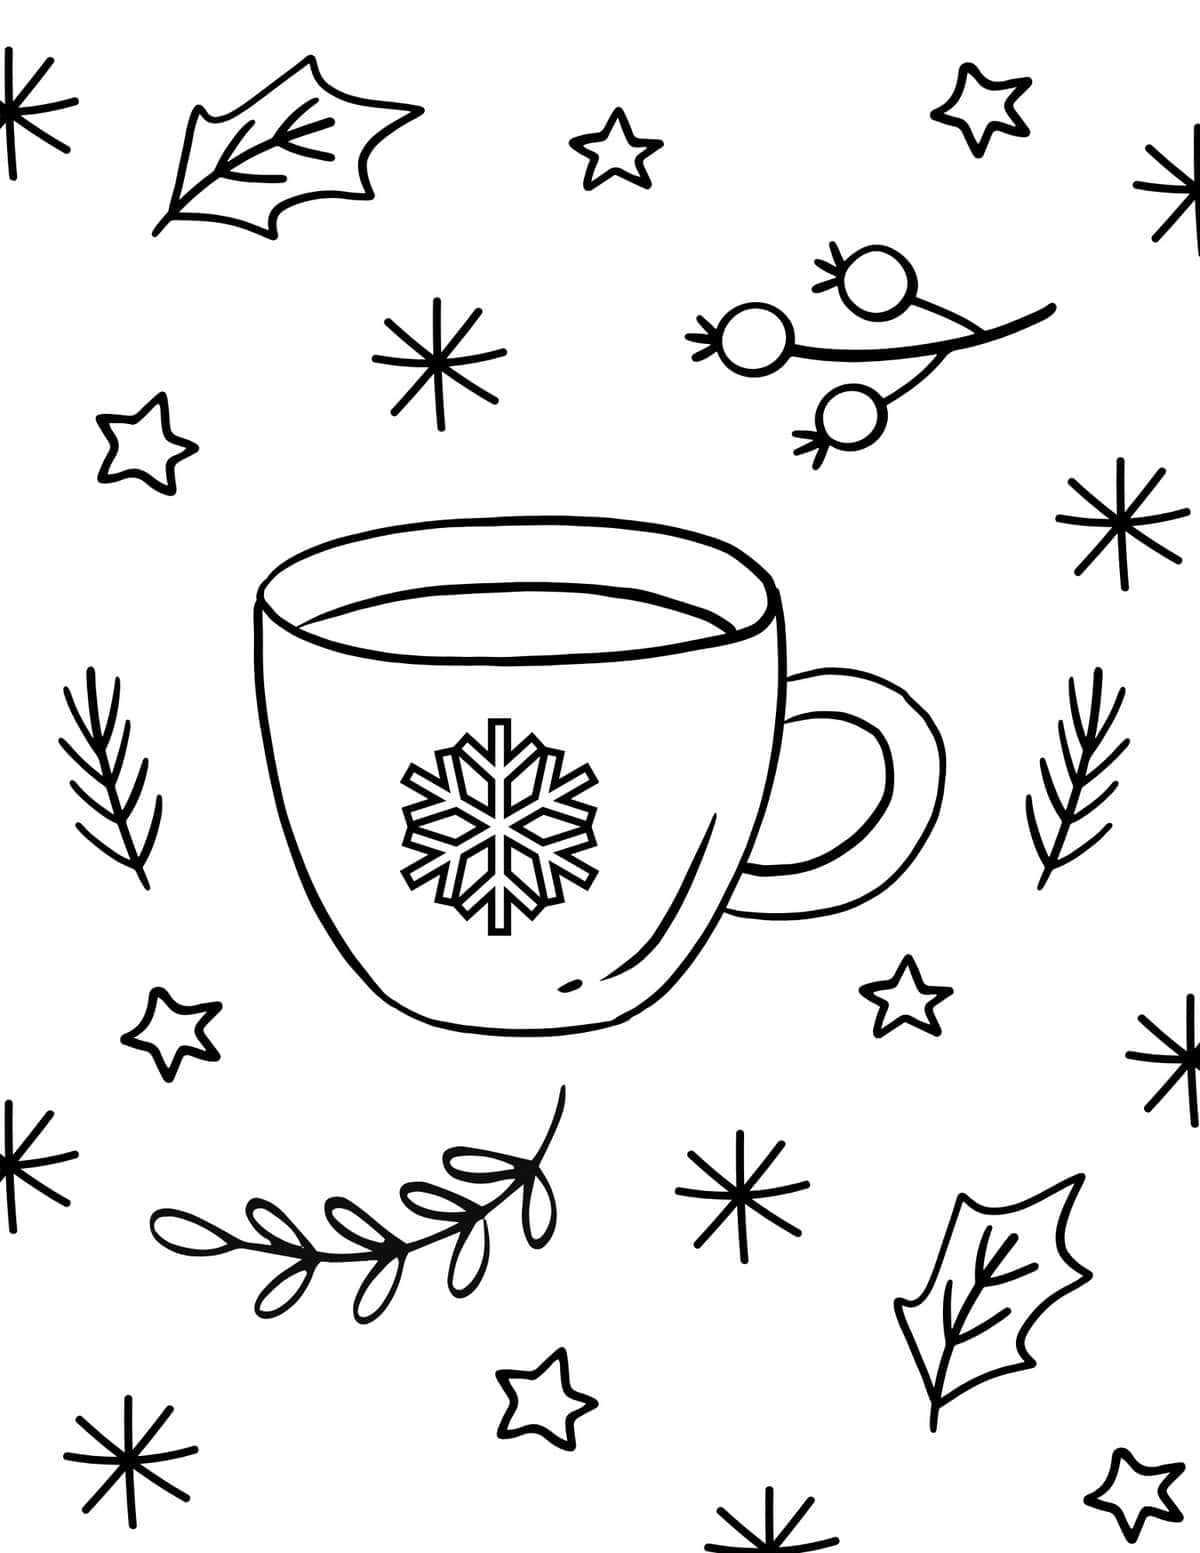 Free winter coloring pages for kids